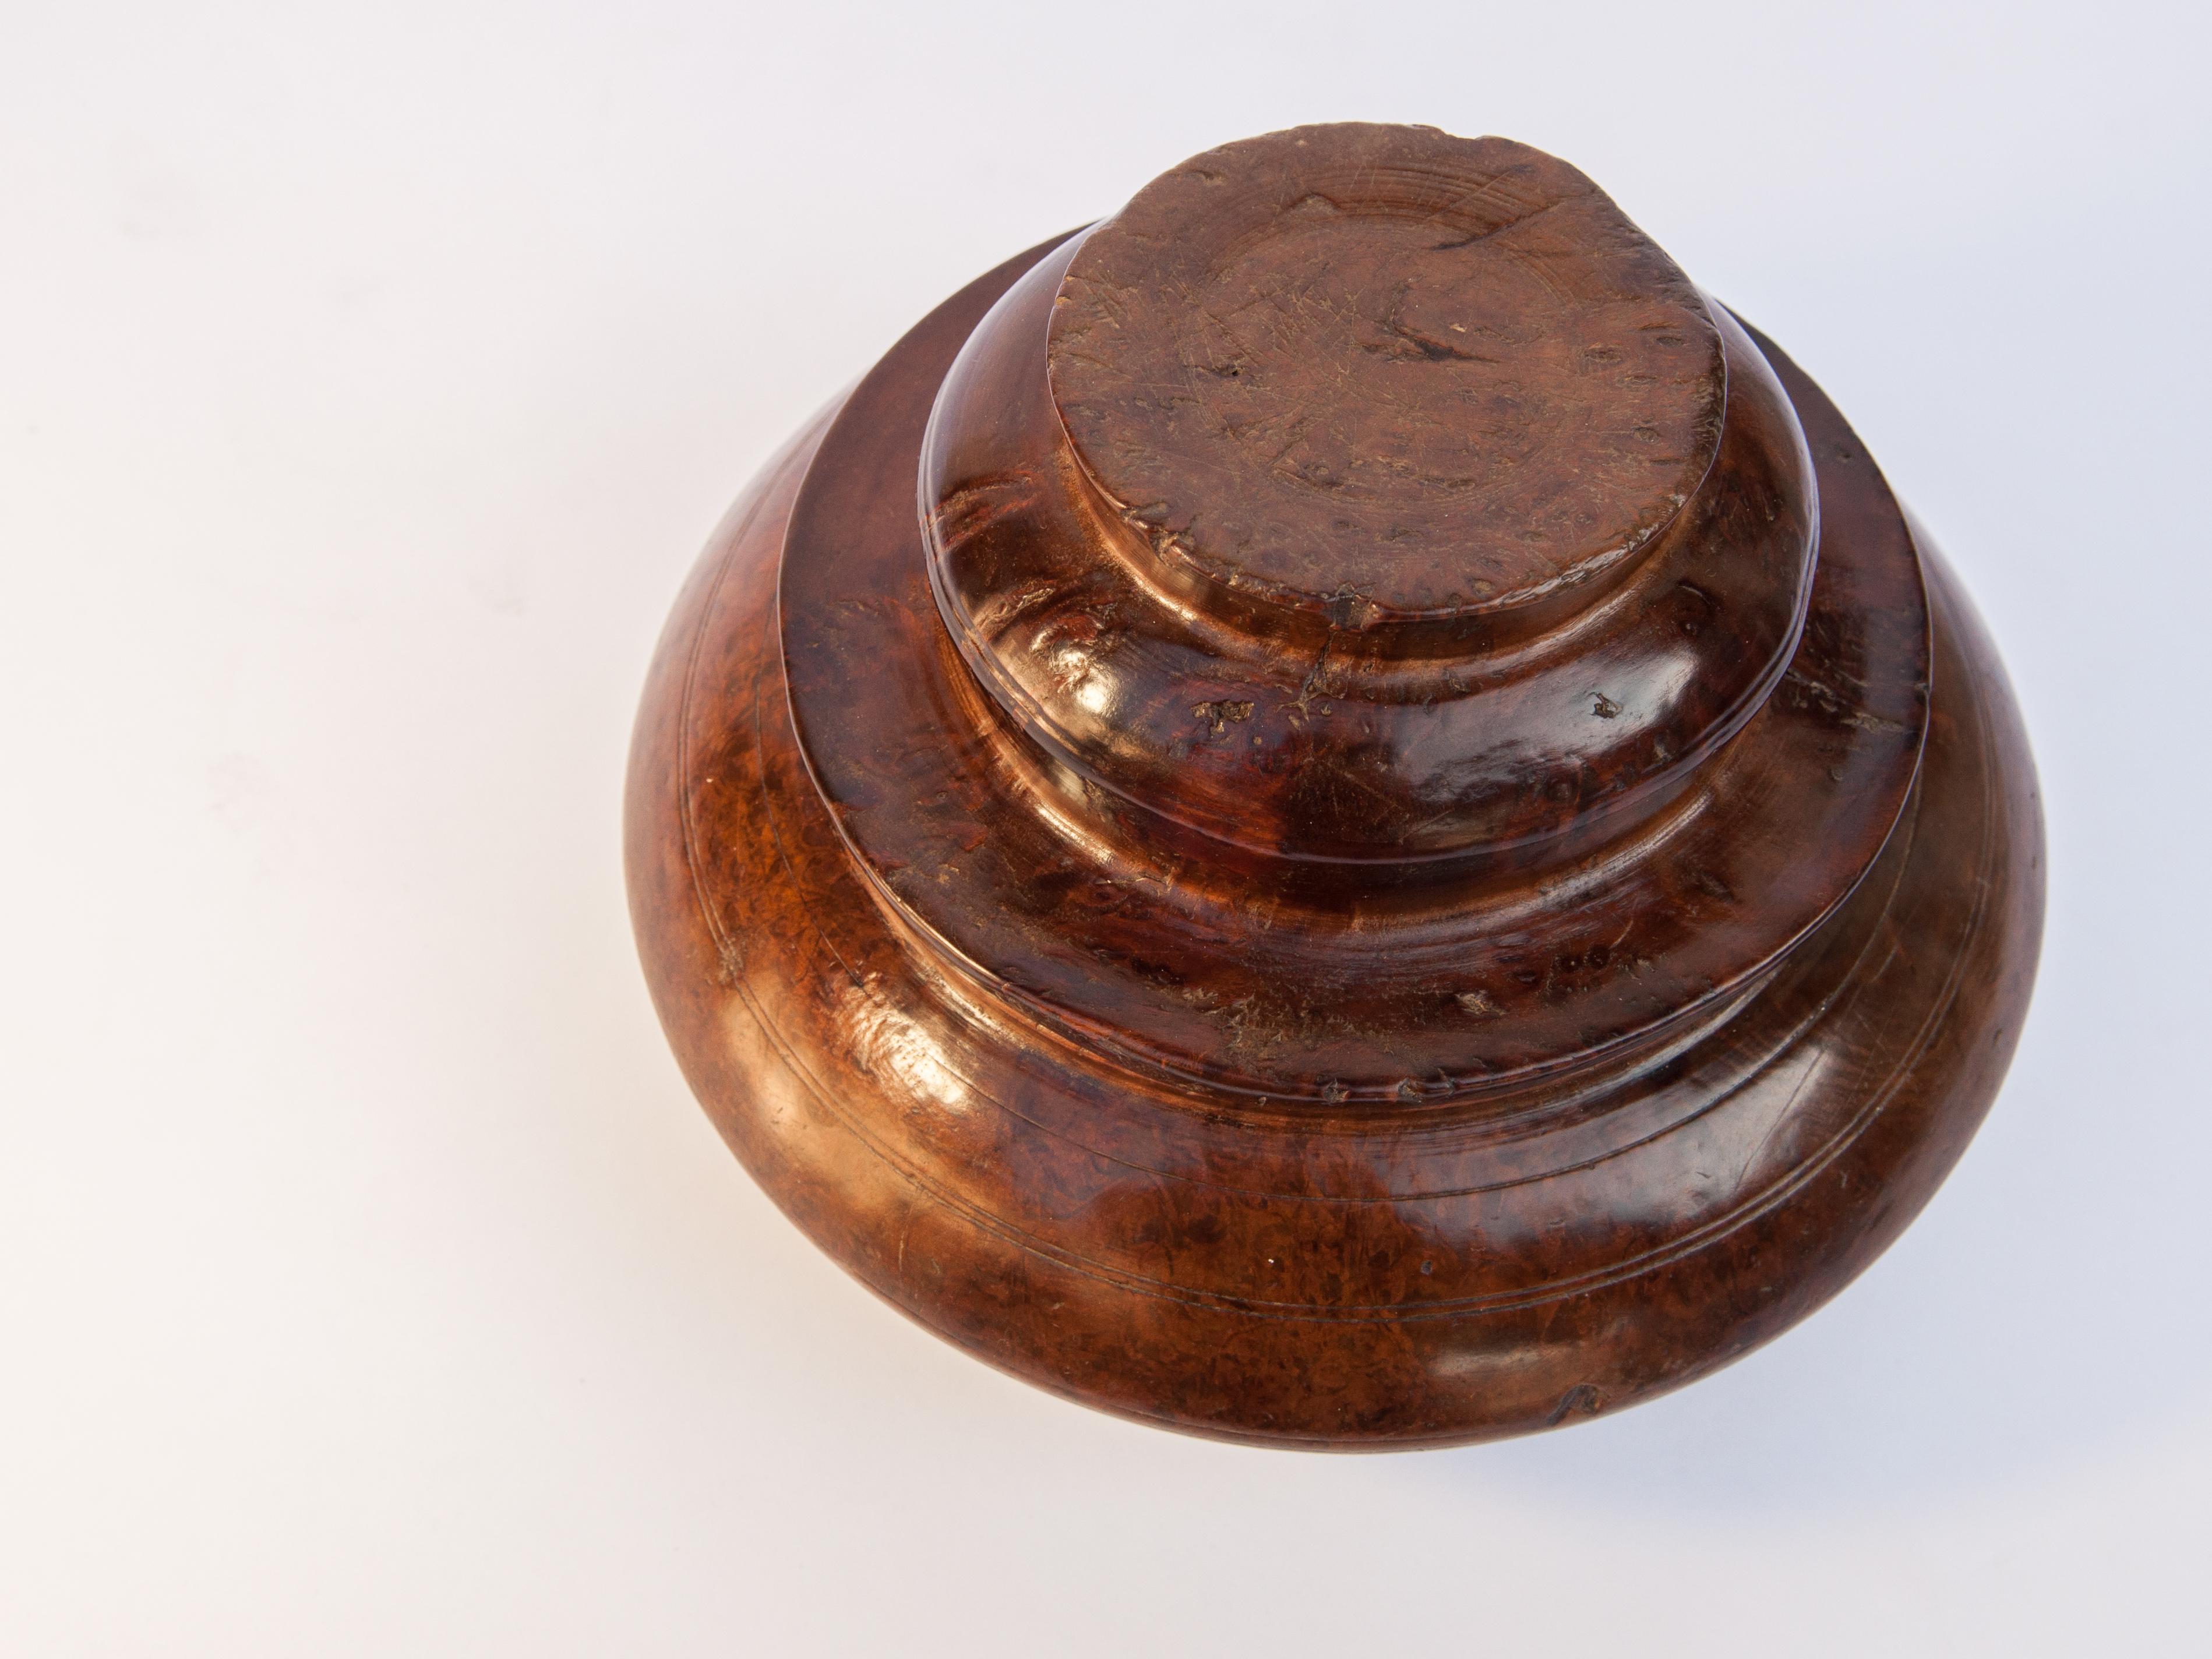 Hand-Crafted Old Burl Wood Tsampa Container with Lid, Tibet, Mid-20th Century